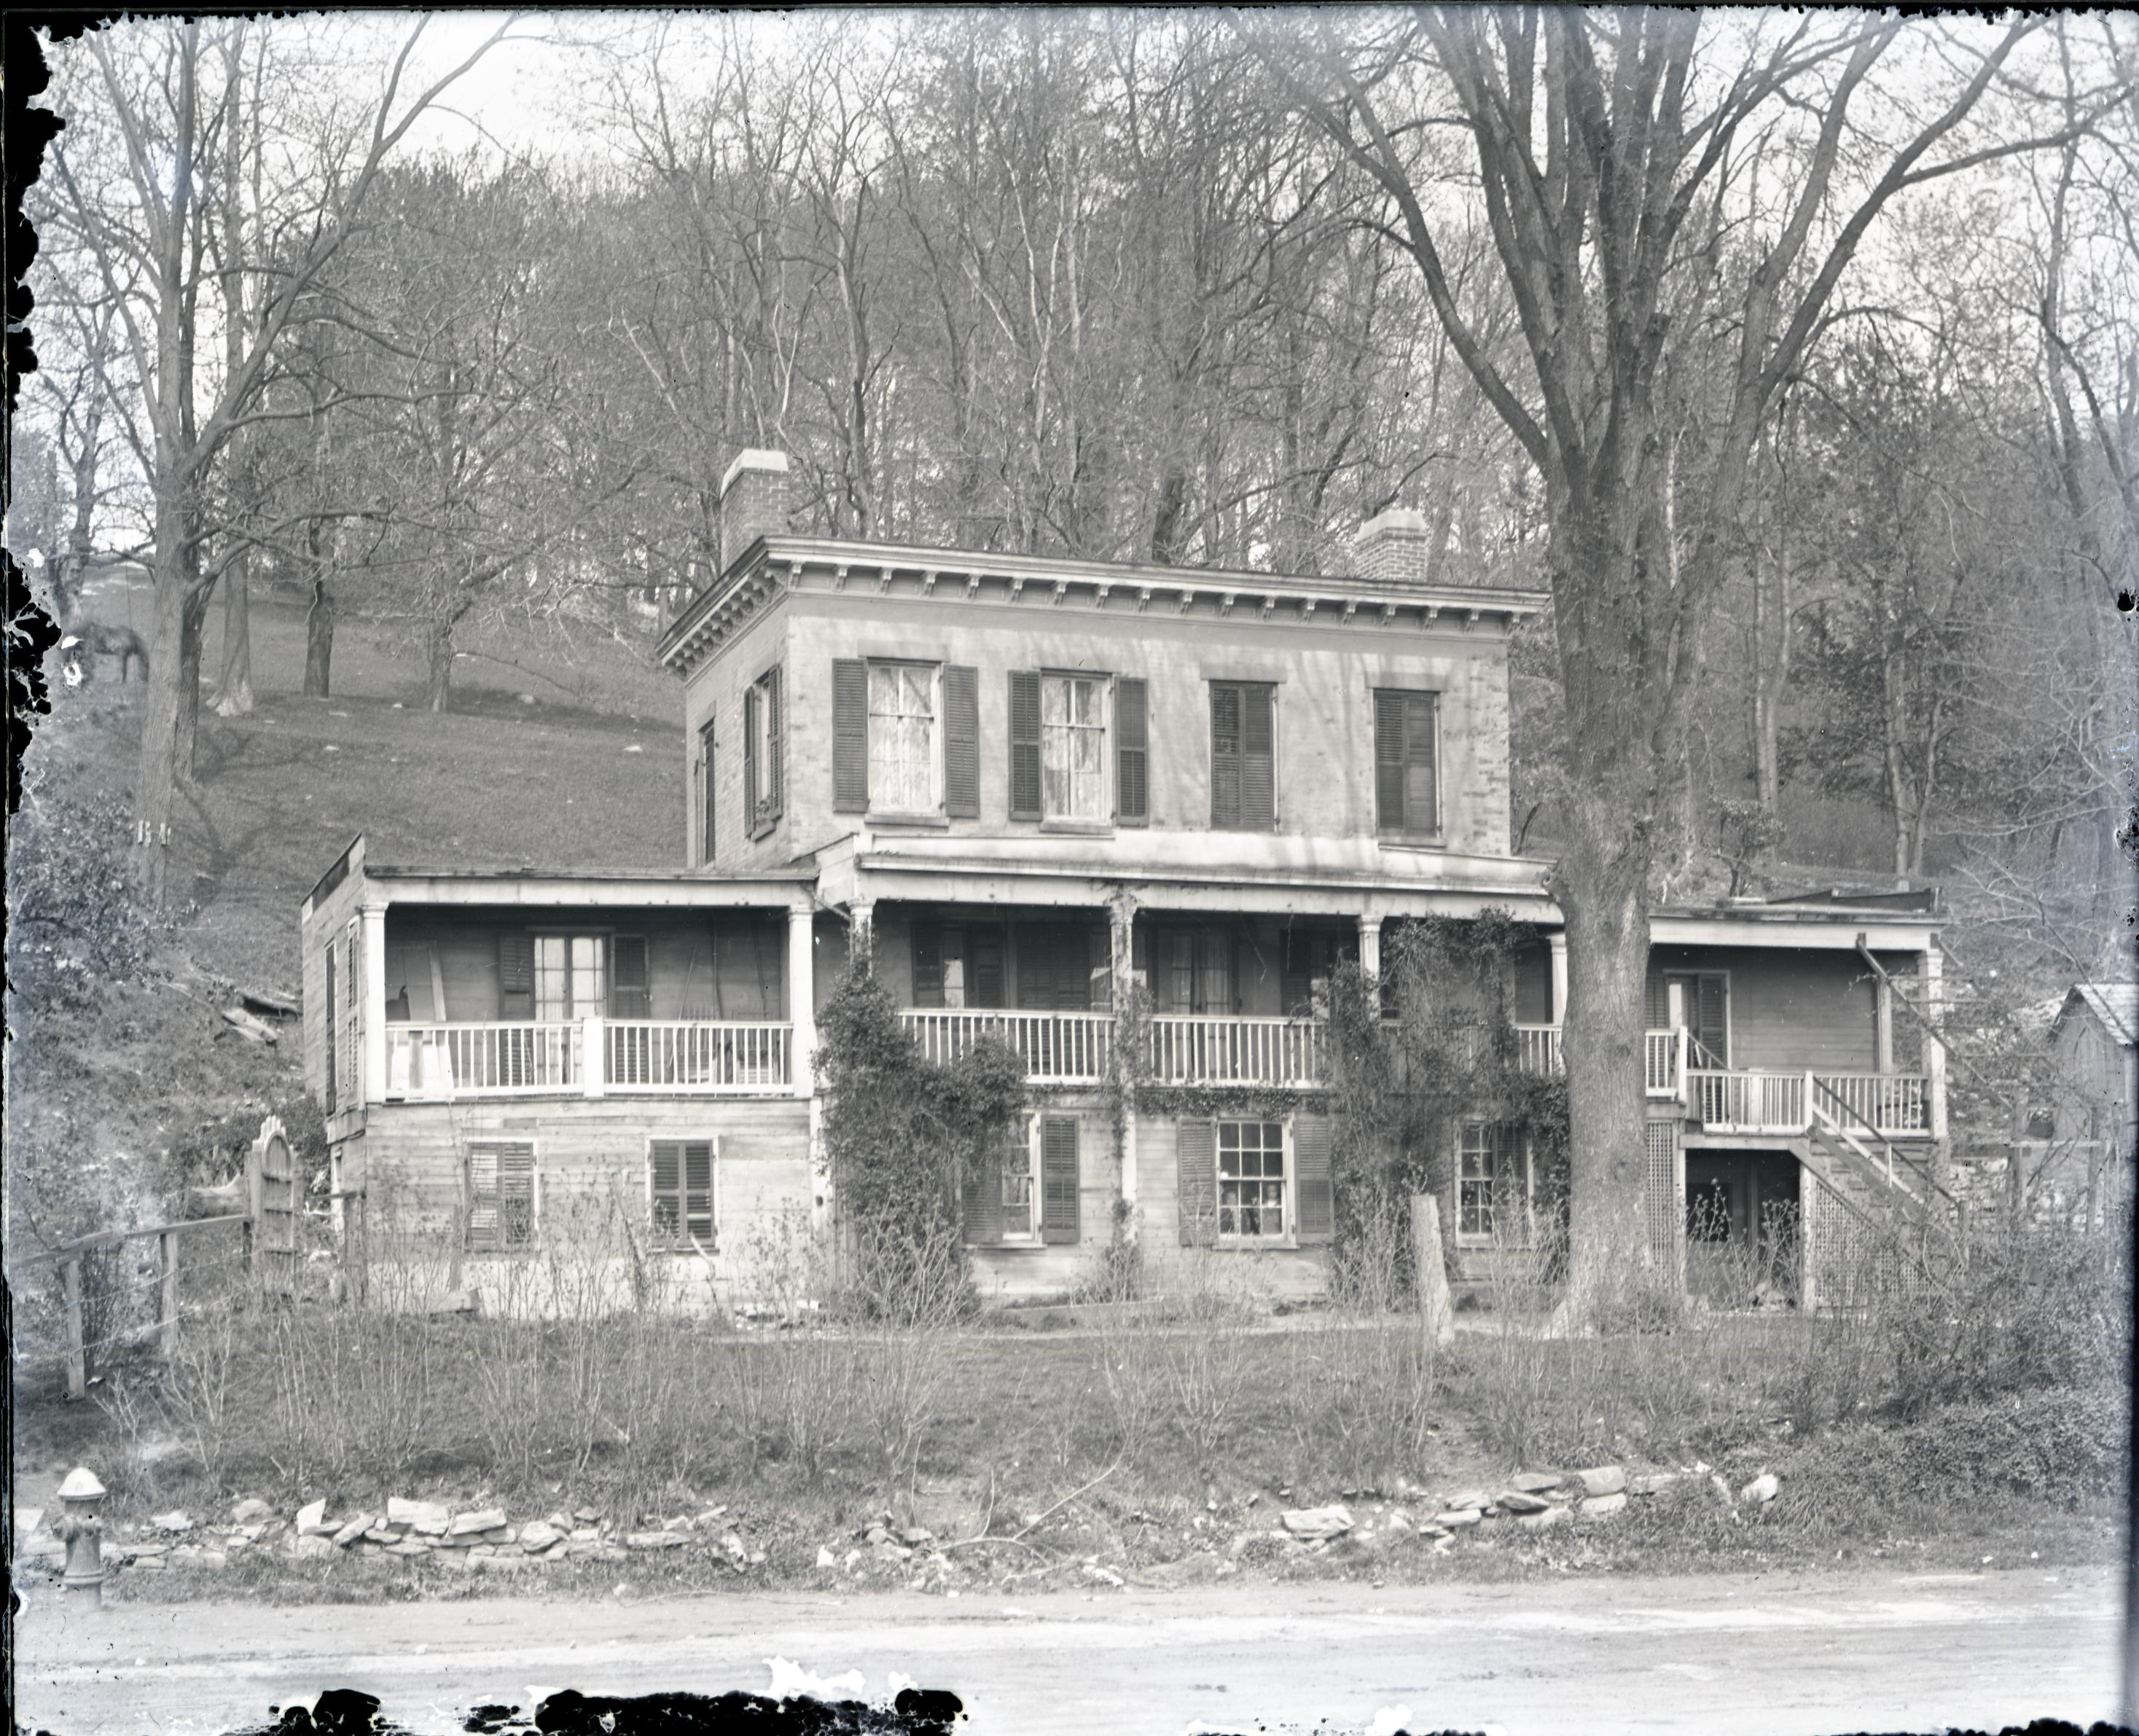 Tippett House (c. 1900?) Source: Westchester Historical Society